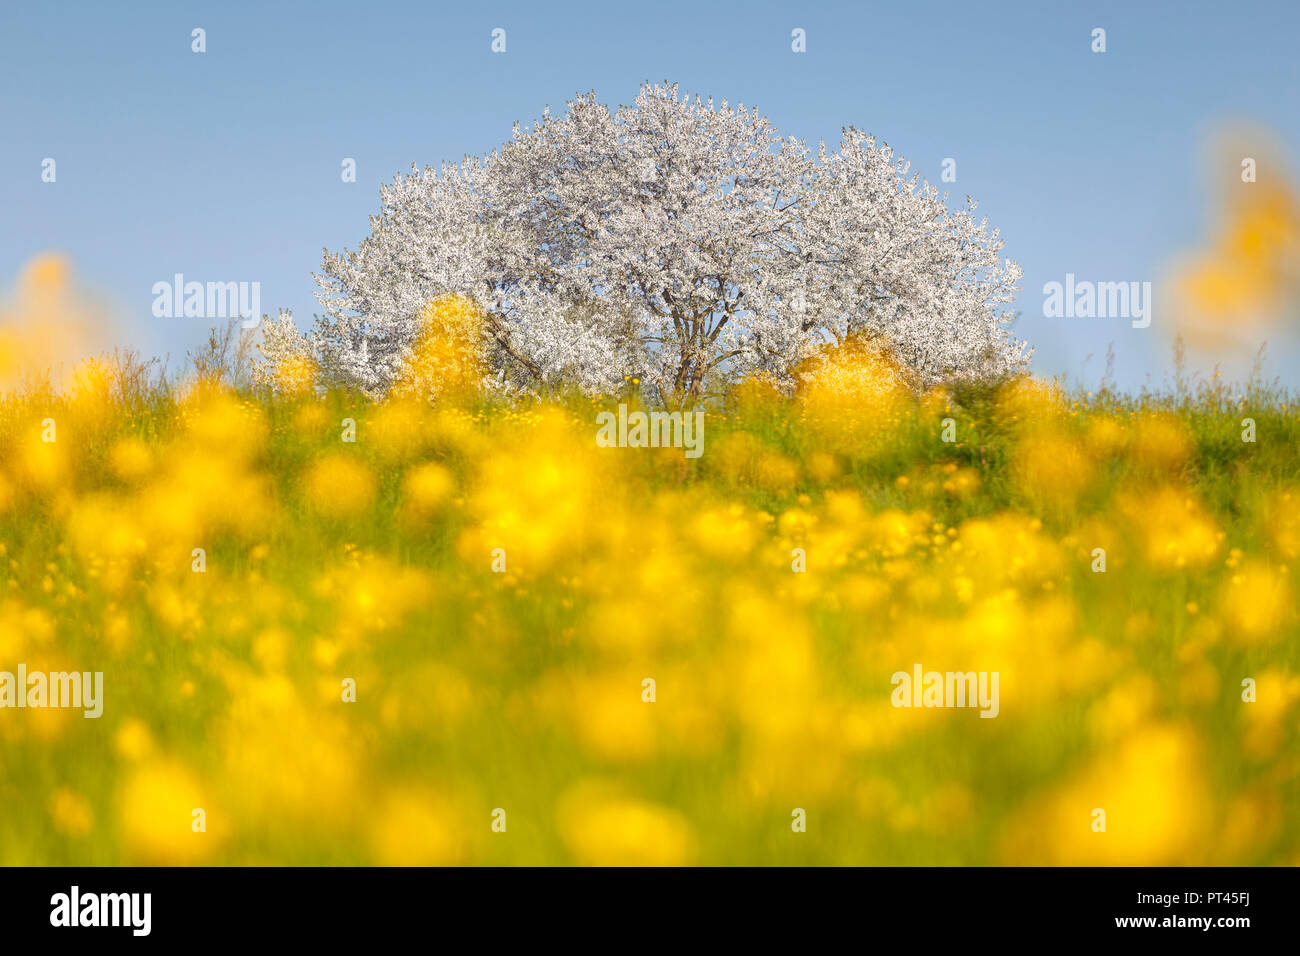 Buttercups (Ranunculus) flowers frame the most biggest cherry tree in Italy in a spring time, Vergo Zoccorino, Besana in Brianza, Monza and Brianza province, Lombardy, Italy, Europe Stock Photo